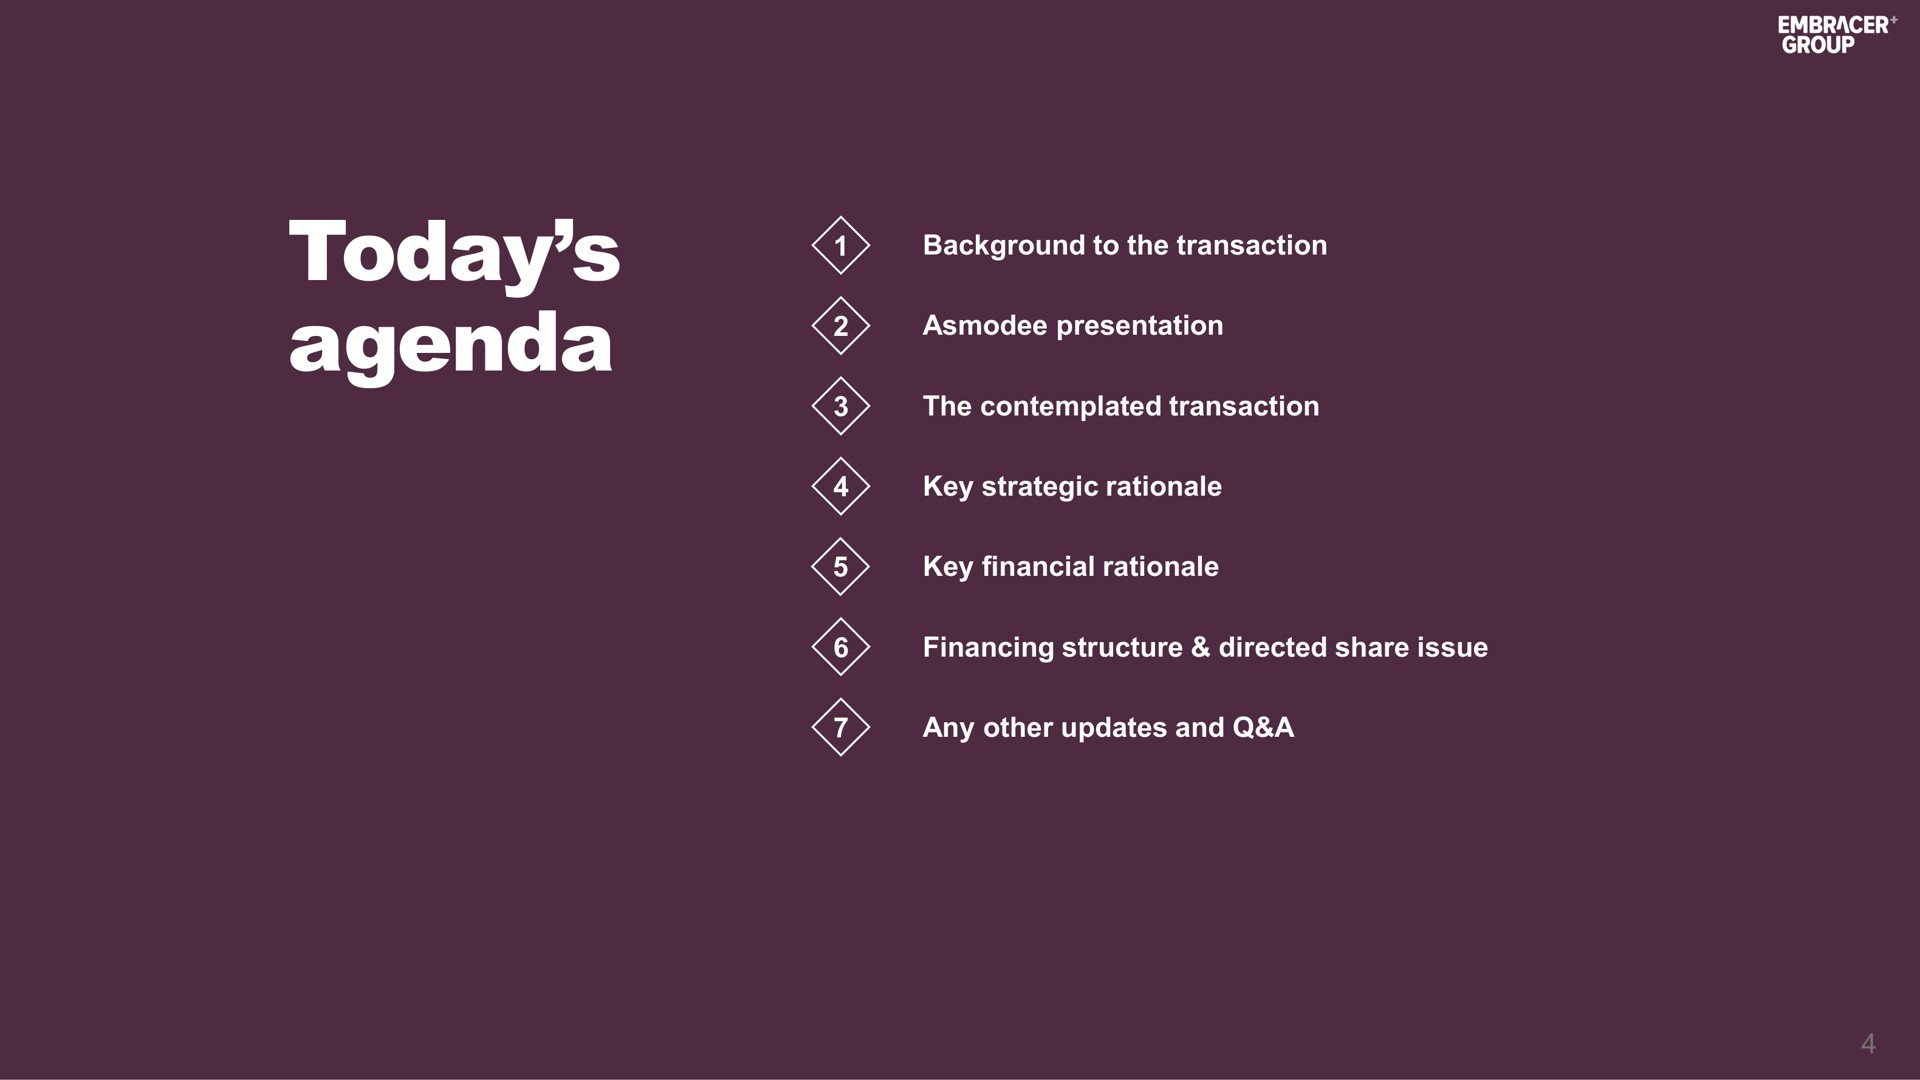 today agenda | Embracer Group